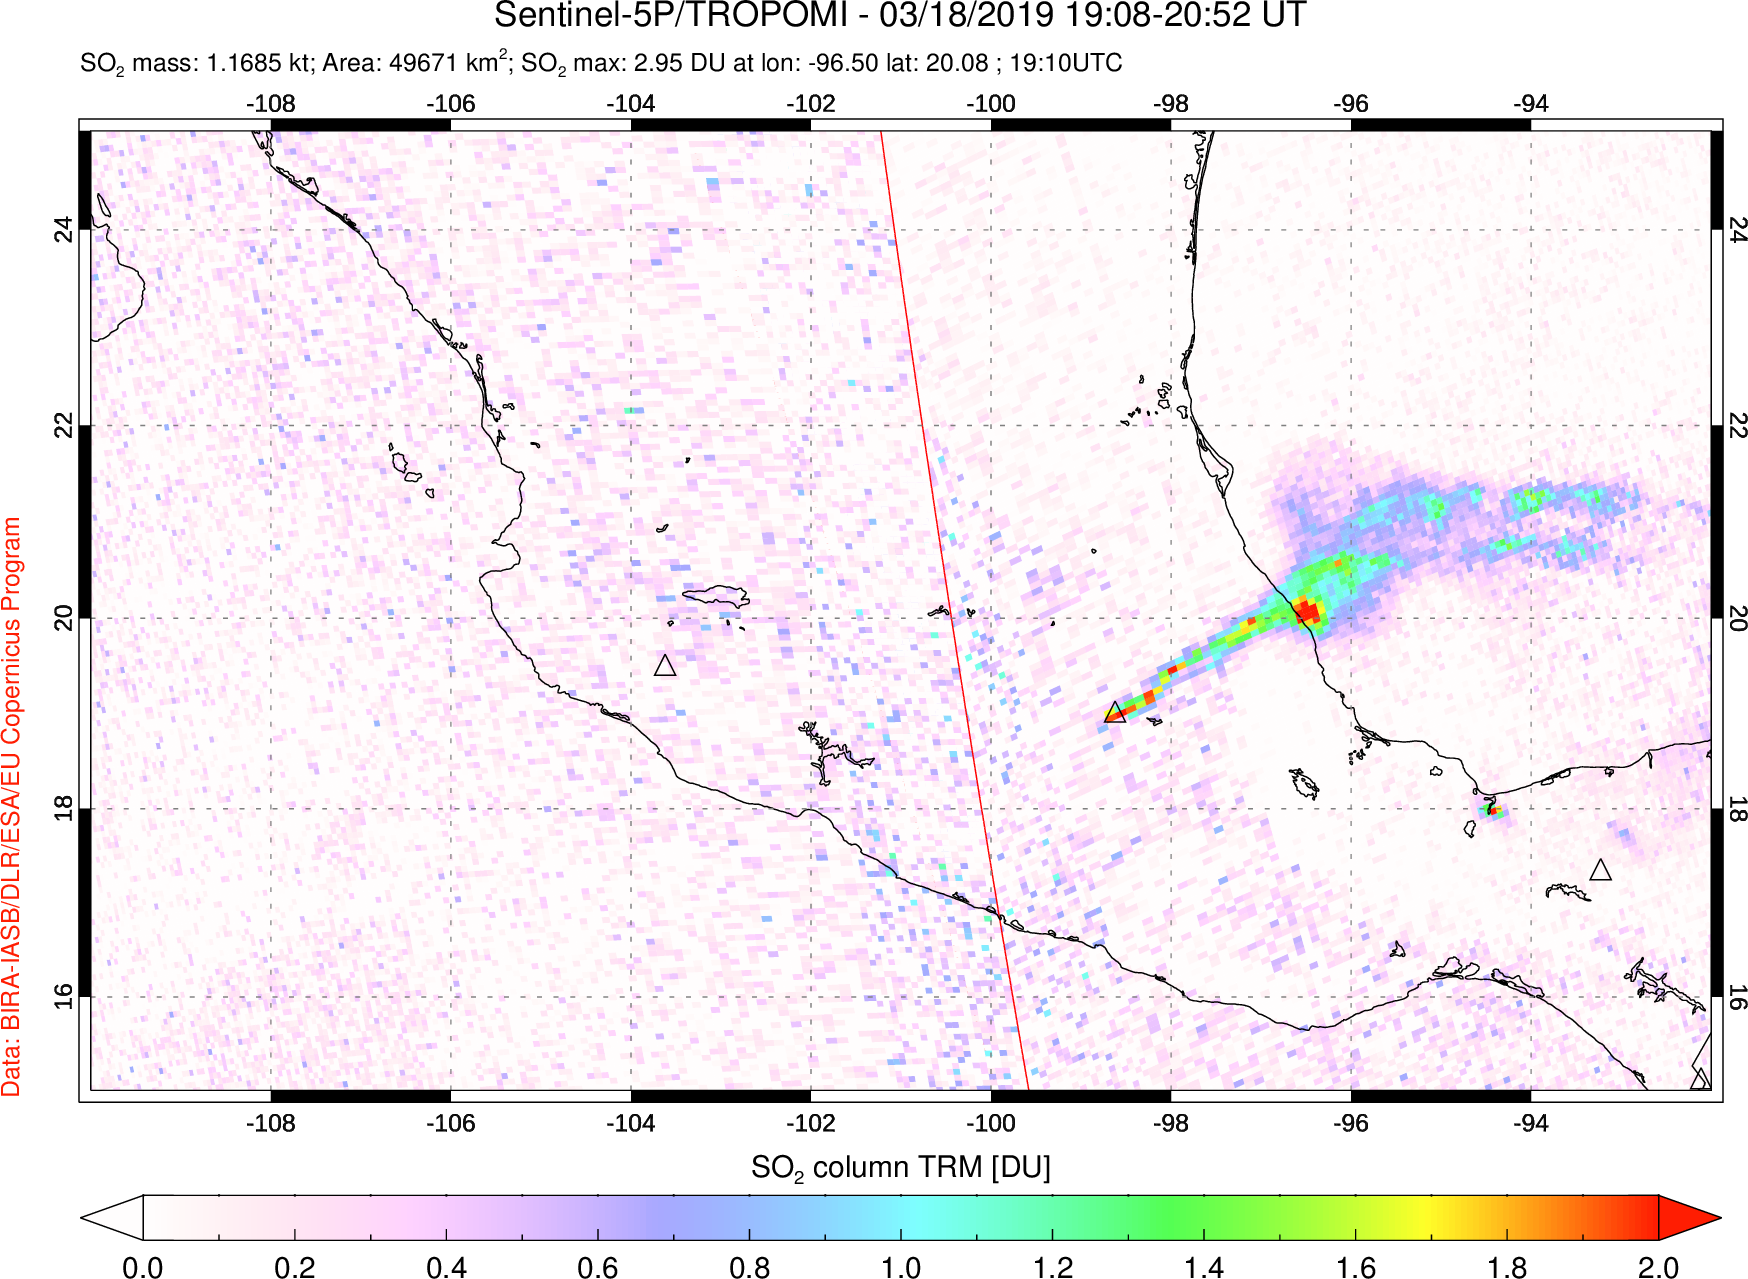 A sulfur dioxide image over Mexico on Mar 18, 2019.